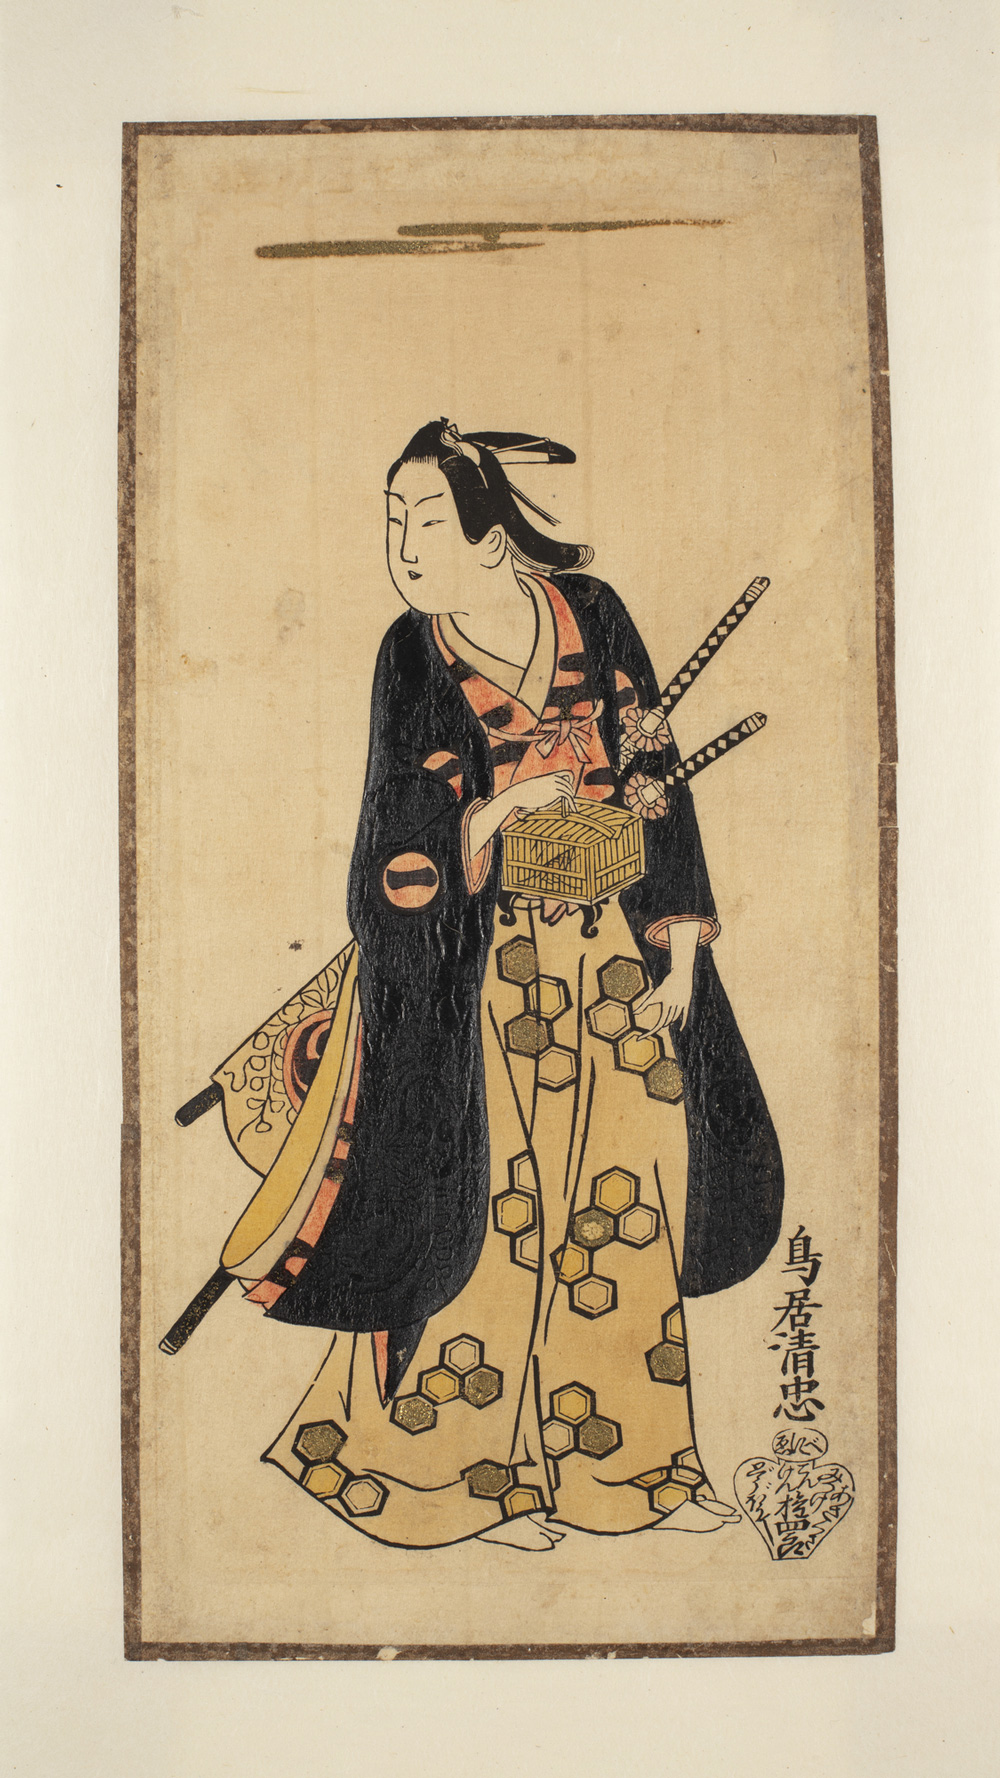 A Japanese print of an actor standing, wearing traditional robes. He has two staffs in his belt and holds a bamboo box.